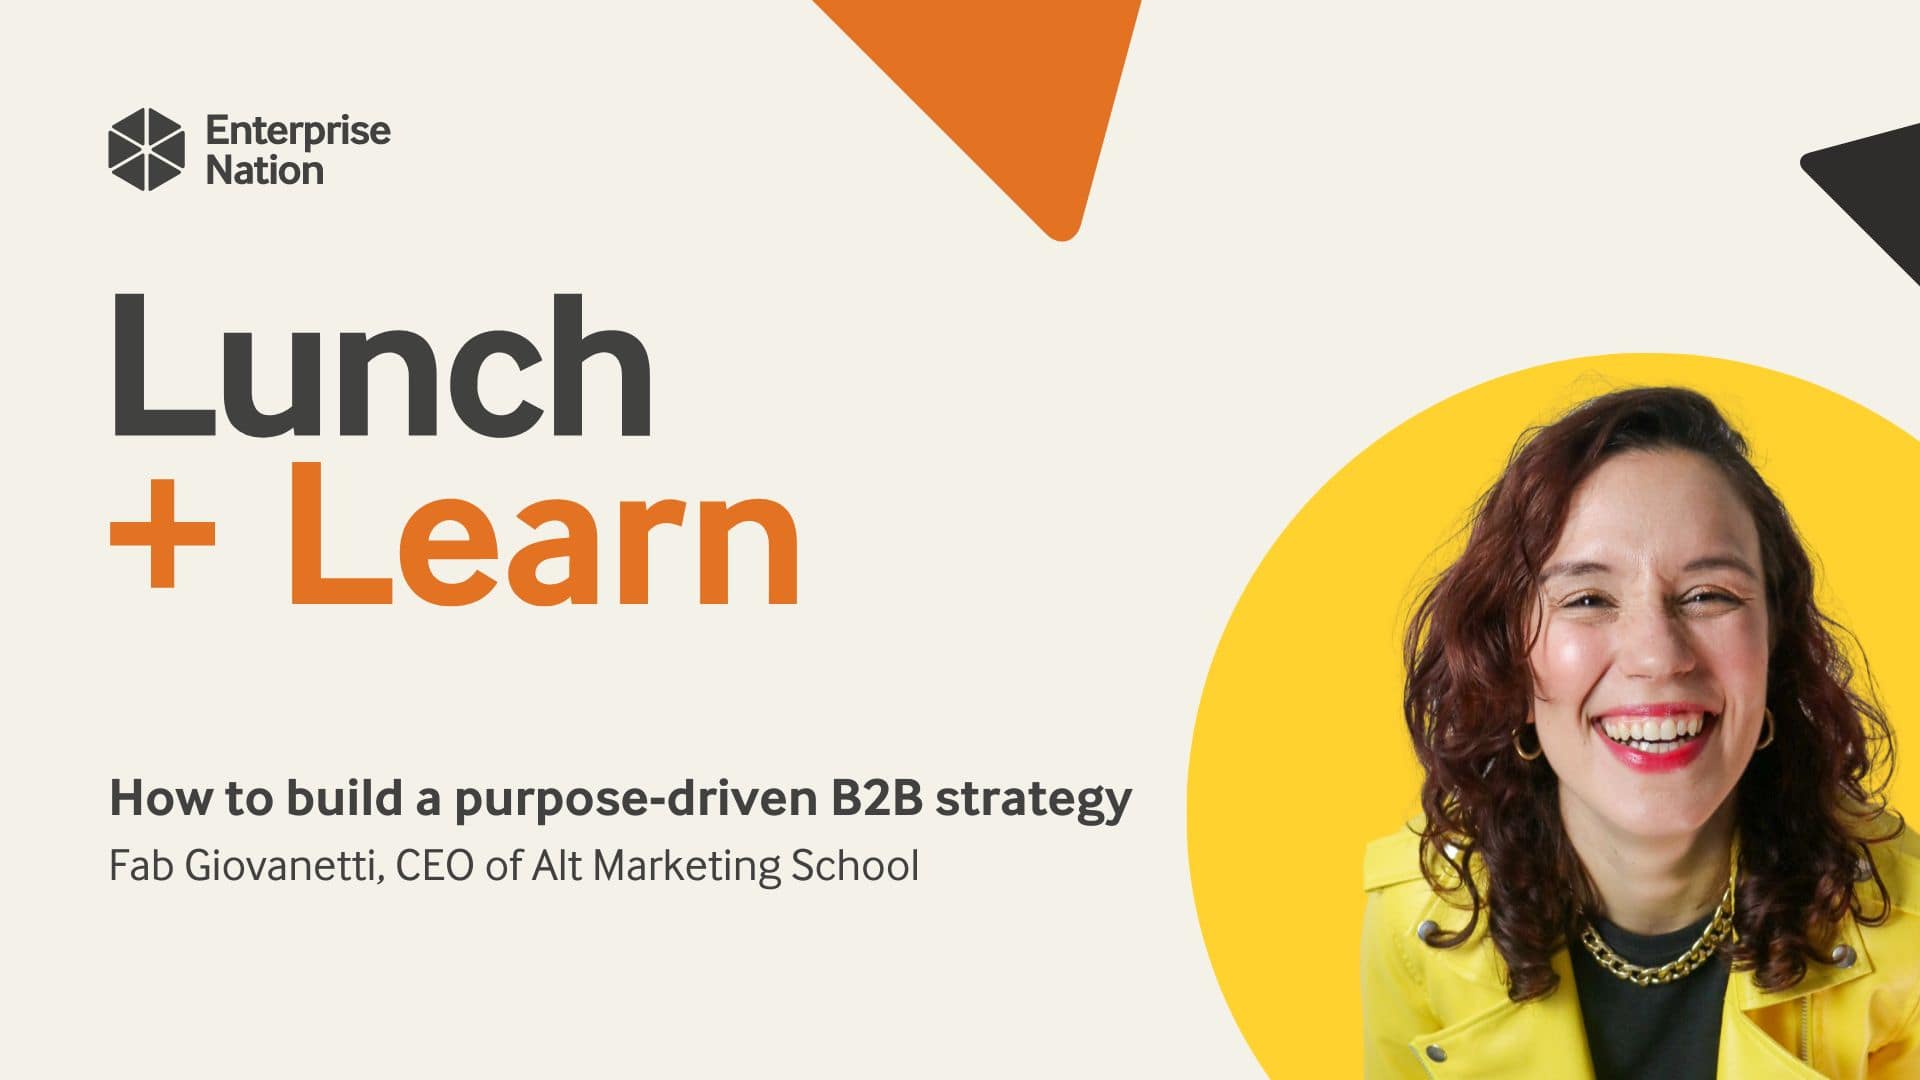 Lunch and Learn: How to build a purpose-driven B2B strategy